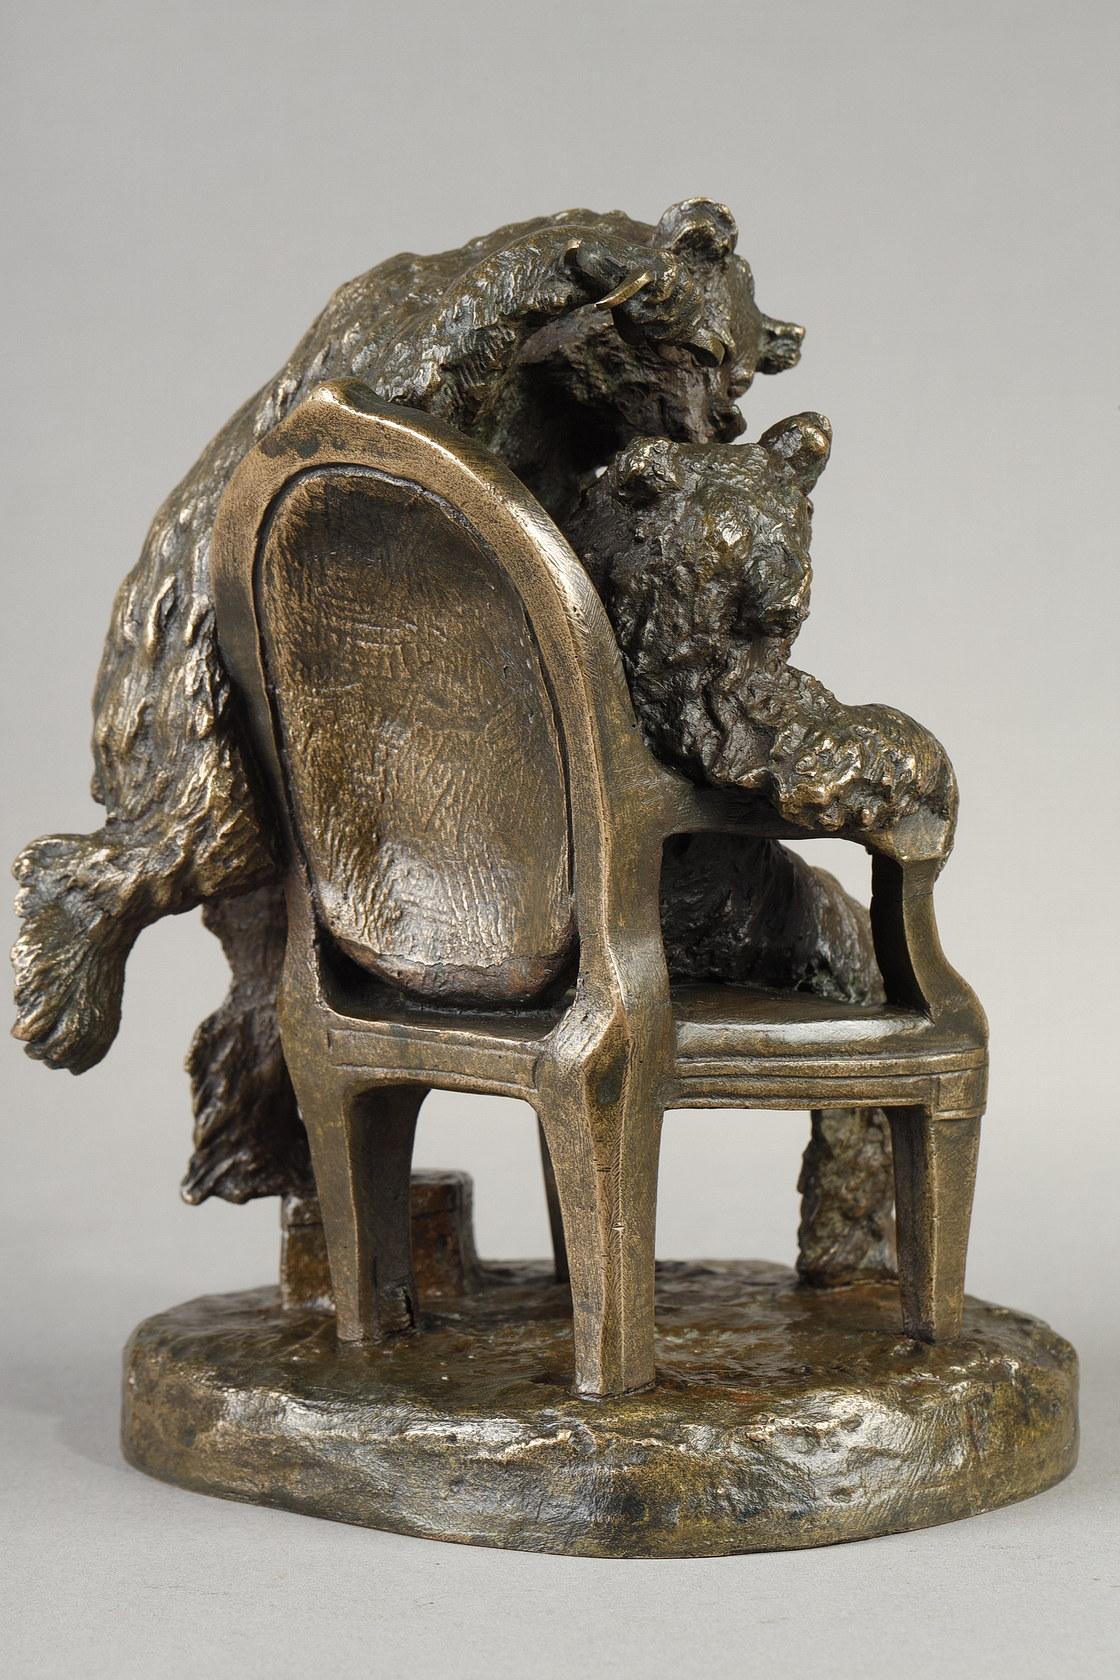 Bear Dentist
by Christophe FRATIN (1801-1864)

Bronze with nuanced old gilt-light brown patina
Signed on the base 